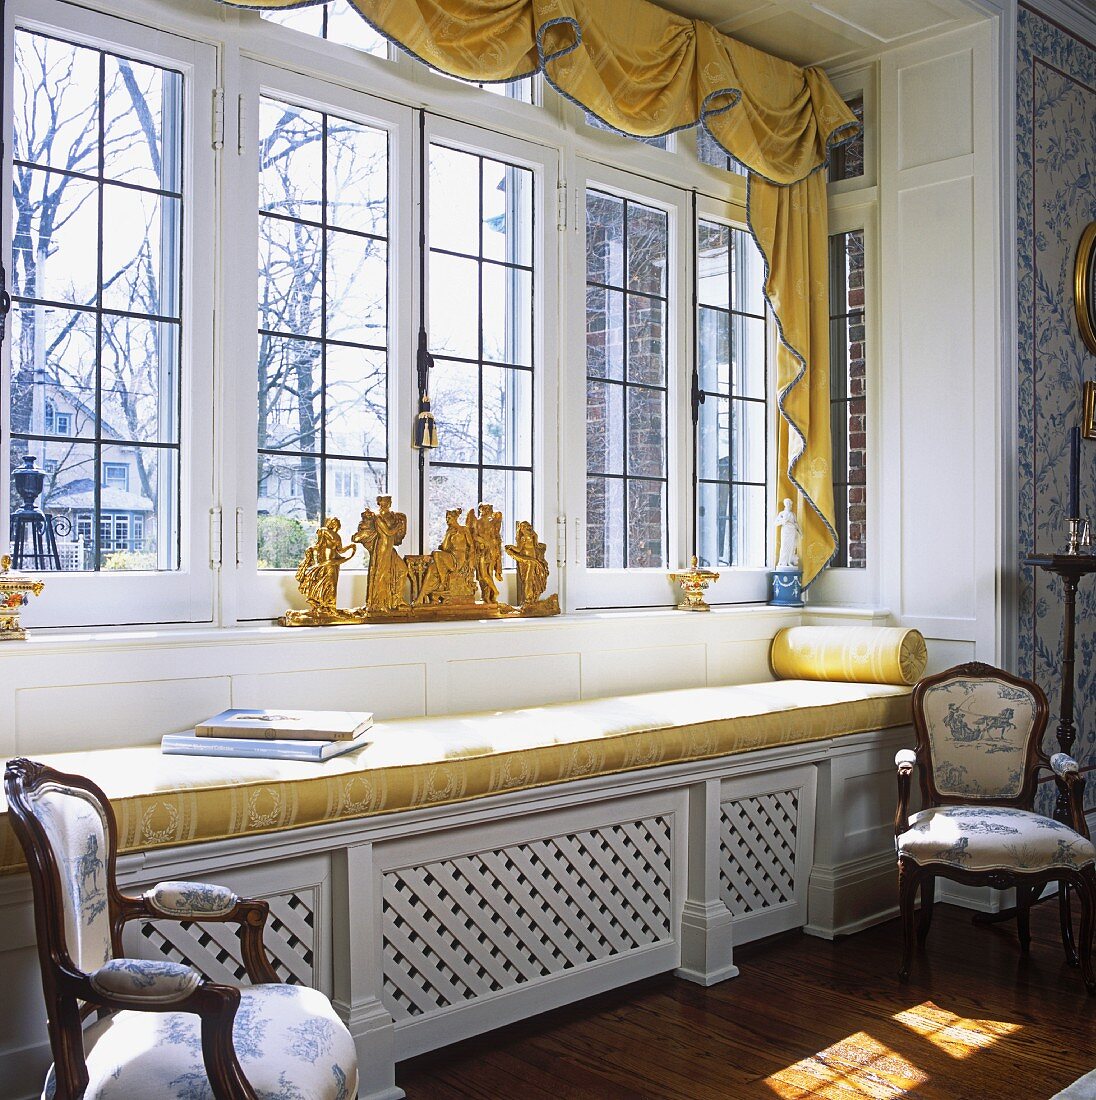 Large window in country house with golden yellow cushions on window seat and gilt ornaments on windowsill